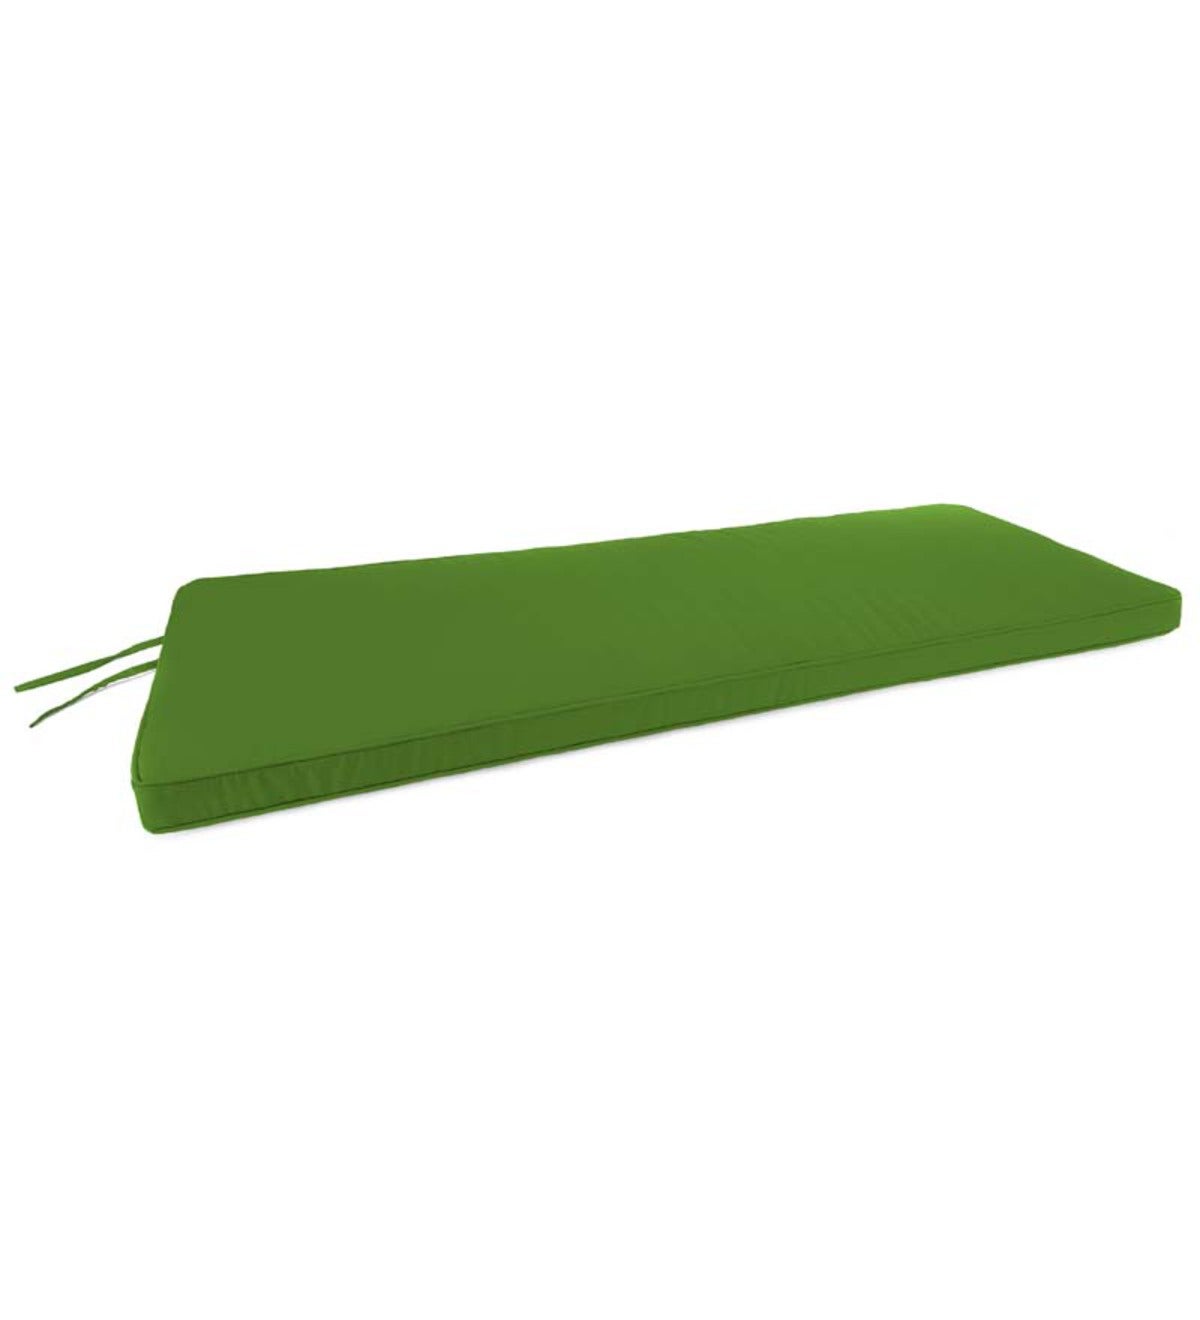 Deluxe Sunbrella Swing/Bench Cushion with ties 53